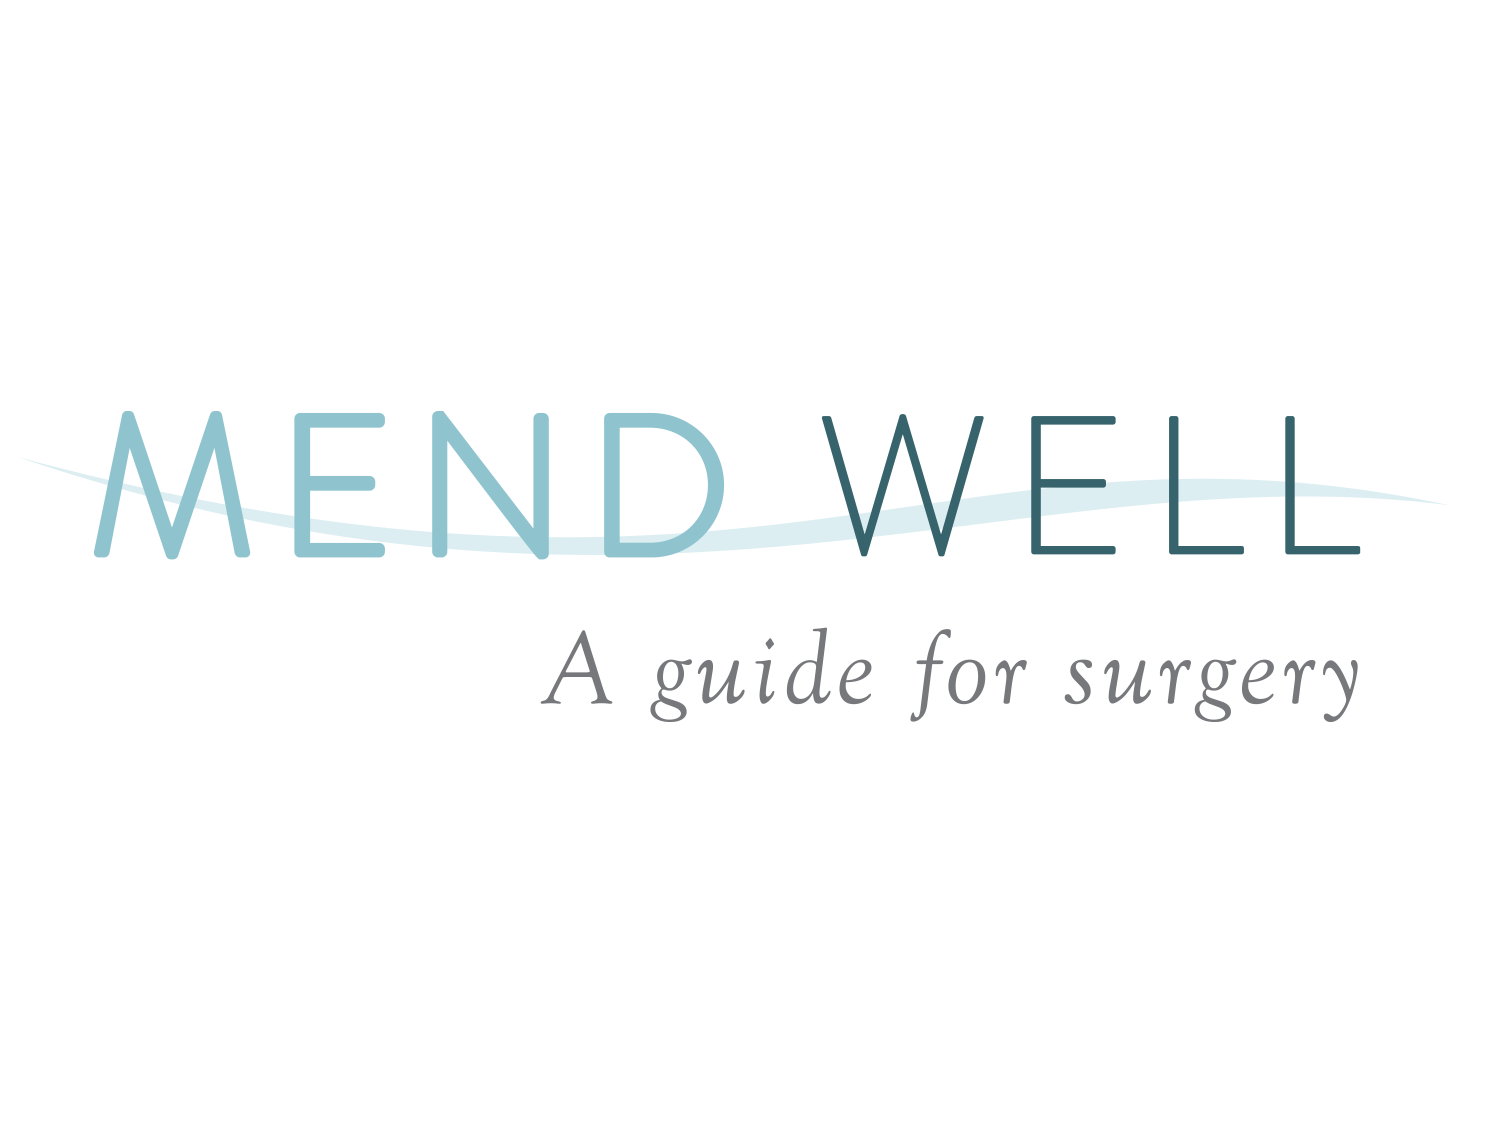 Welcome to Mend Well